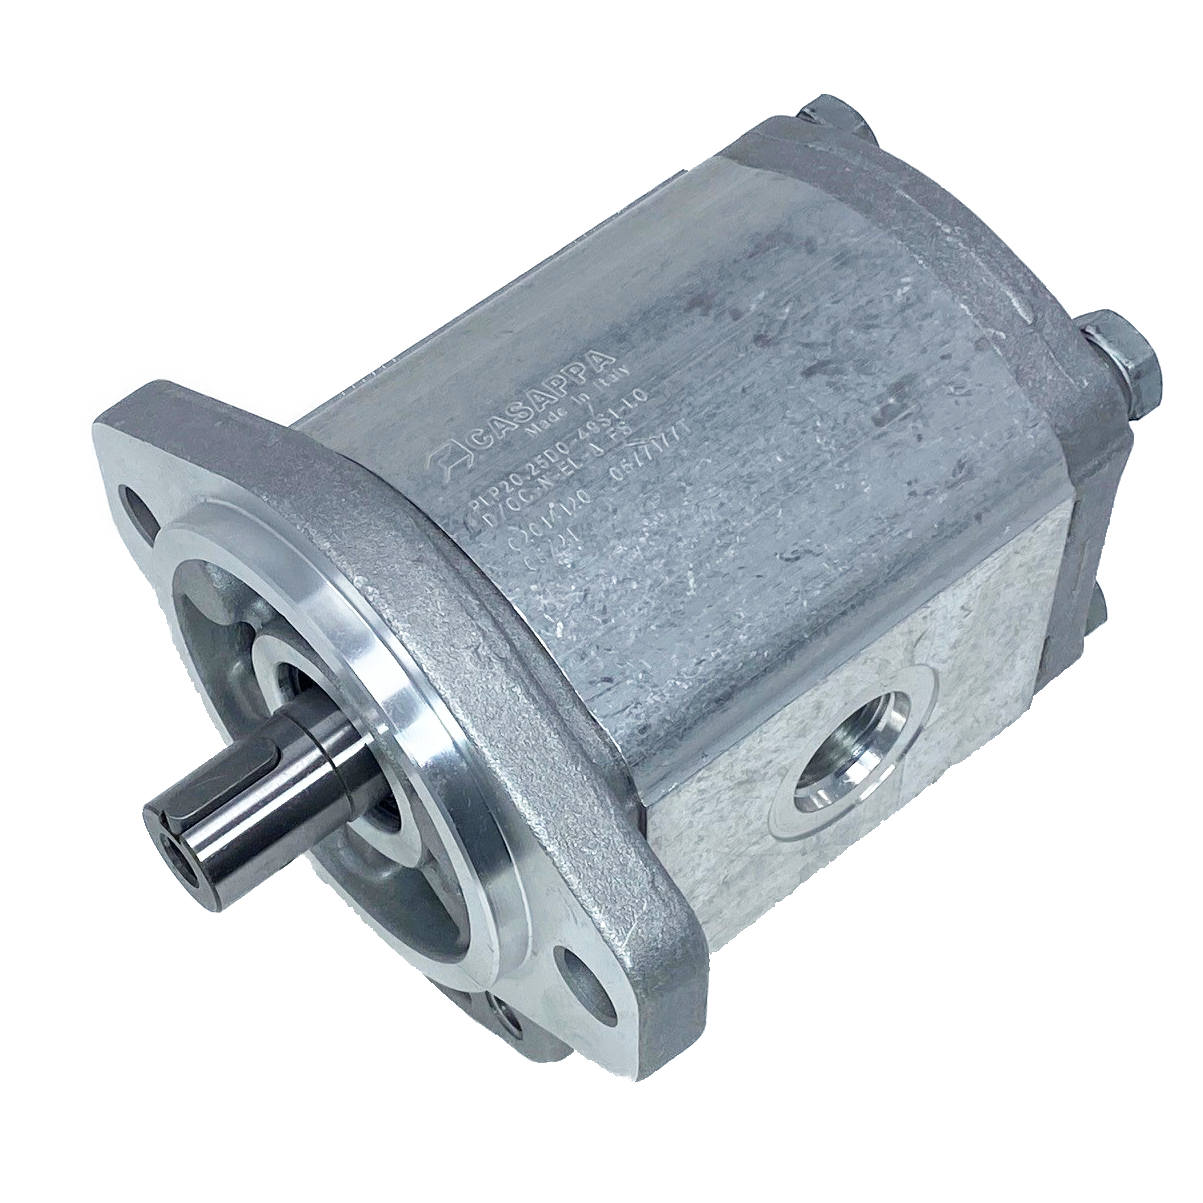 PHP20.31,5S0-50S9-LOG/OC-N-EL : Casappa Polaris Gear Pump, 33.03cc, 2900psi Rated, 2500RPM, CCW, 3/4" Bore x 3/16" Key Shaft, SAE A 2-Bolt Flange, 1.25" #20 SAE Inlet, 0.625 (5/8") #10 SAE Outlet, Cast Iron Body, Aluminum Flange